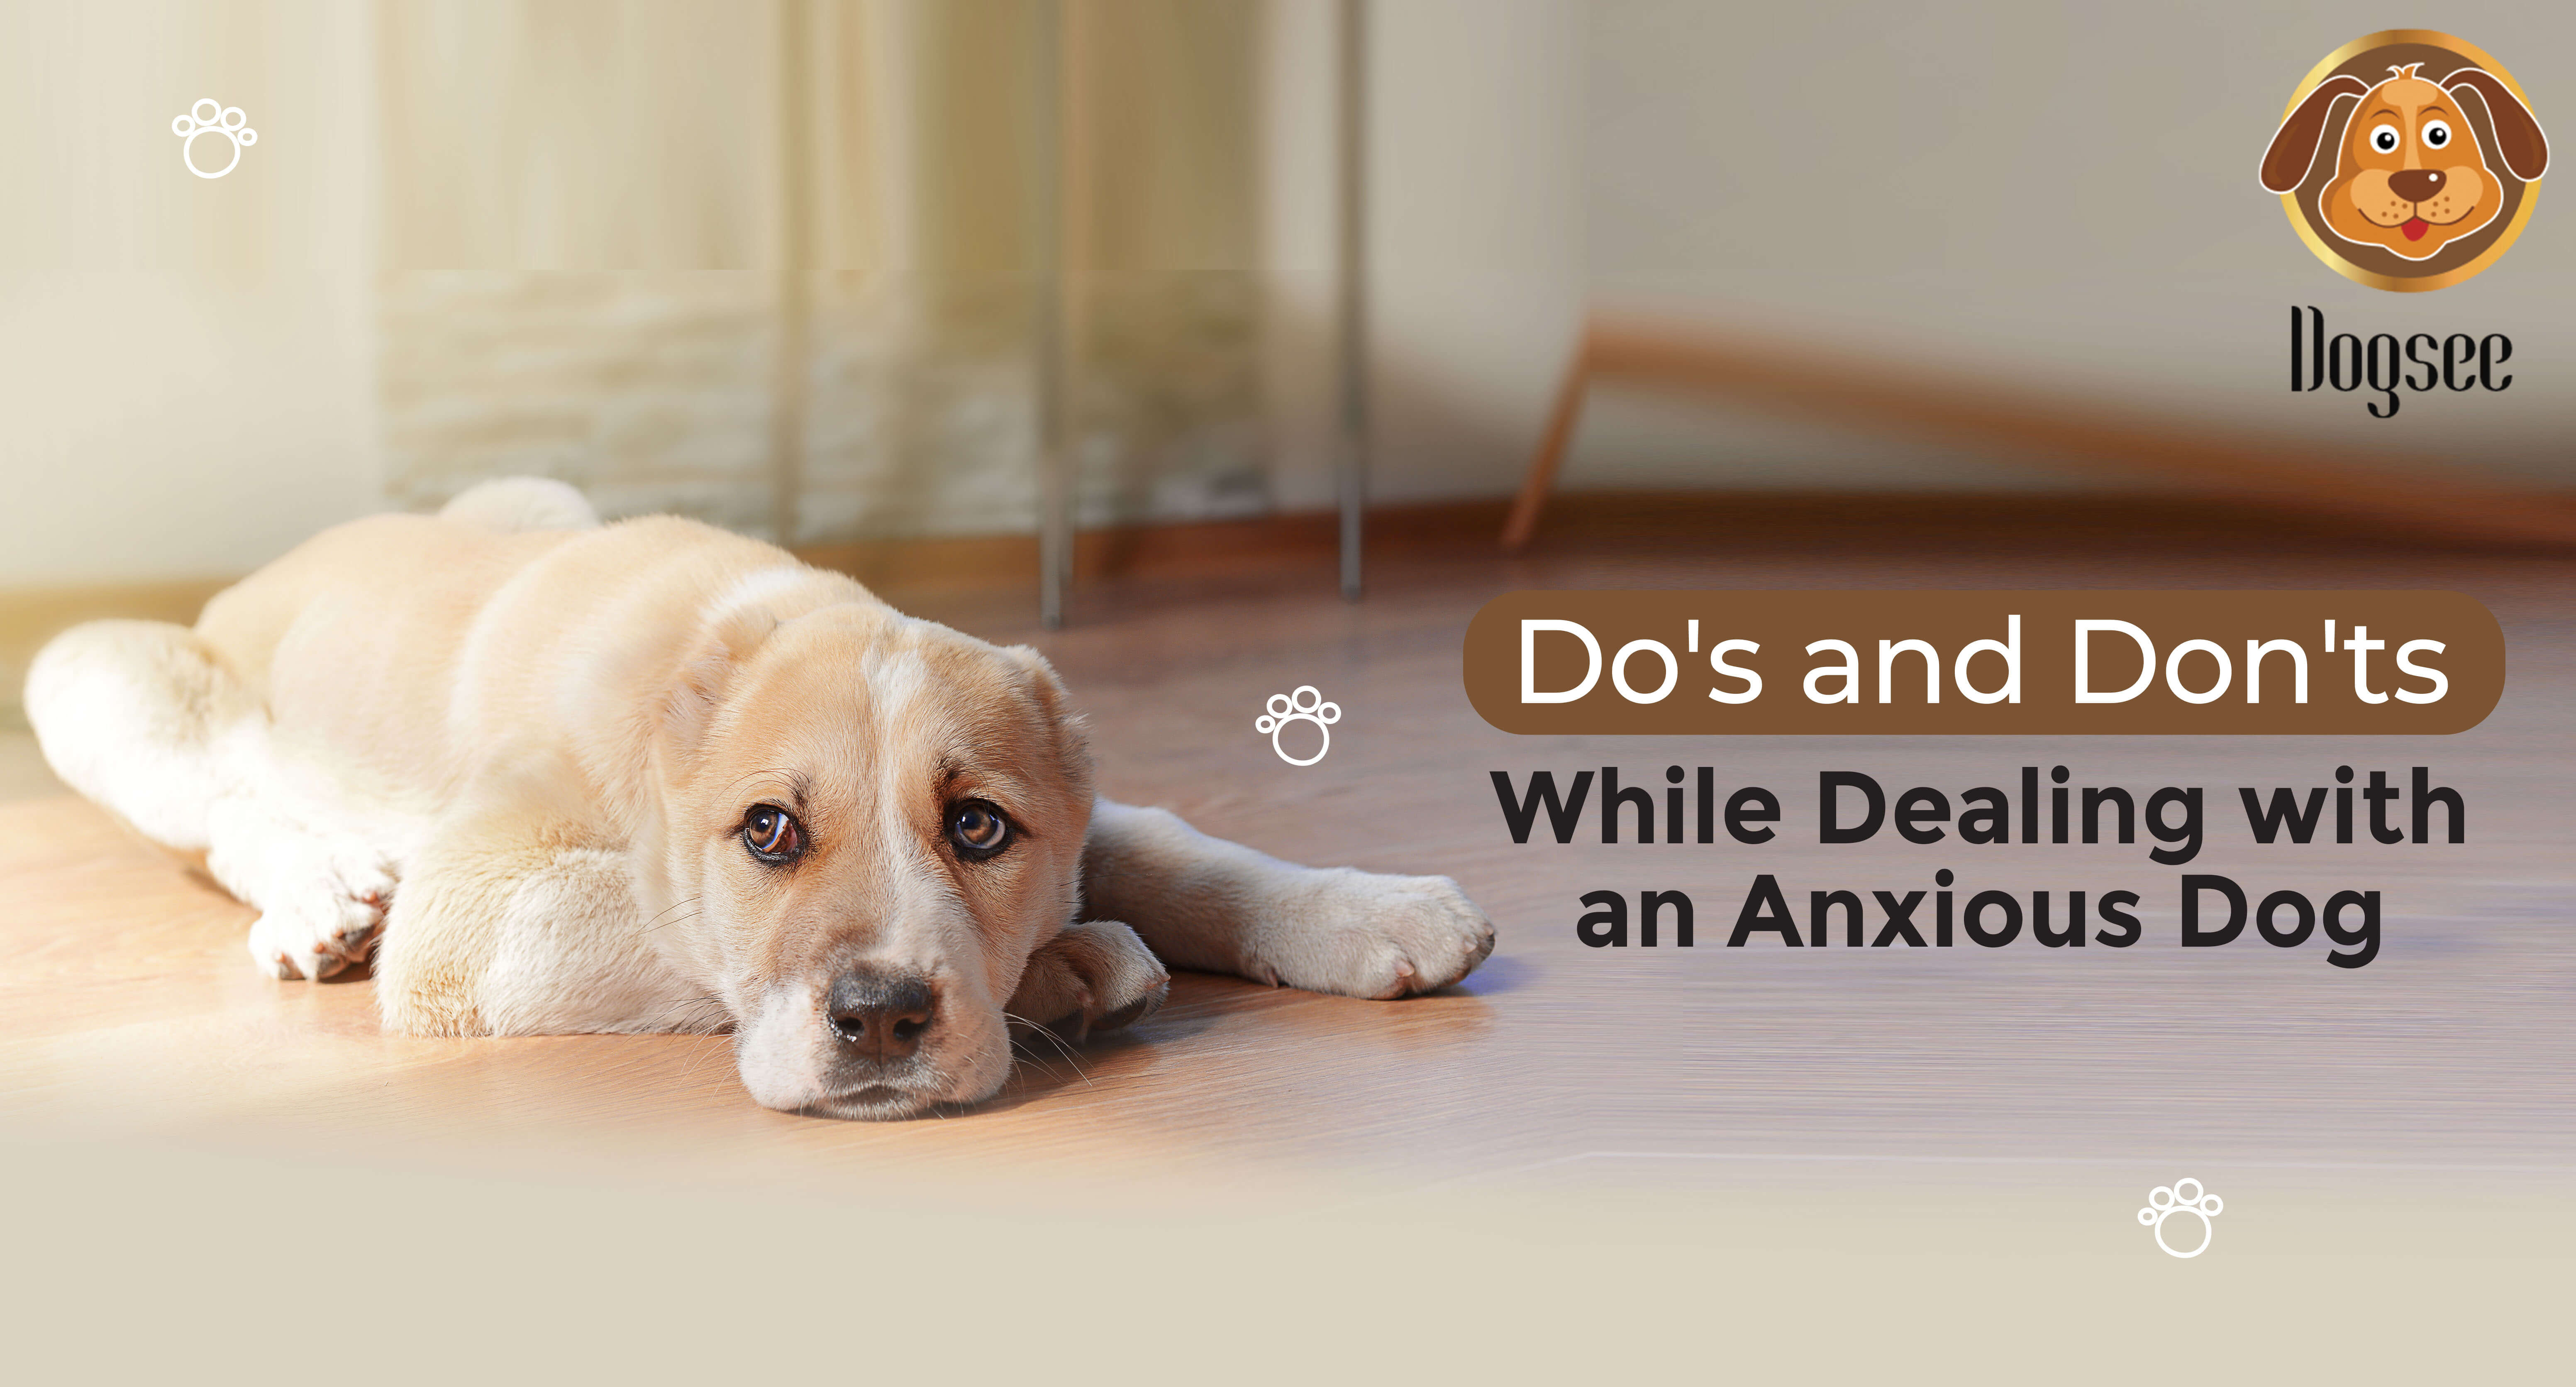 Dos and Don'ts While Dealing with an Anxious Dog